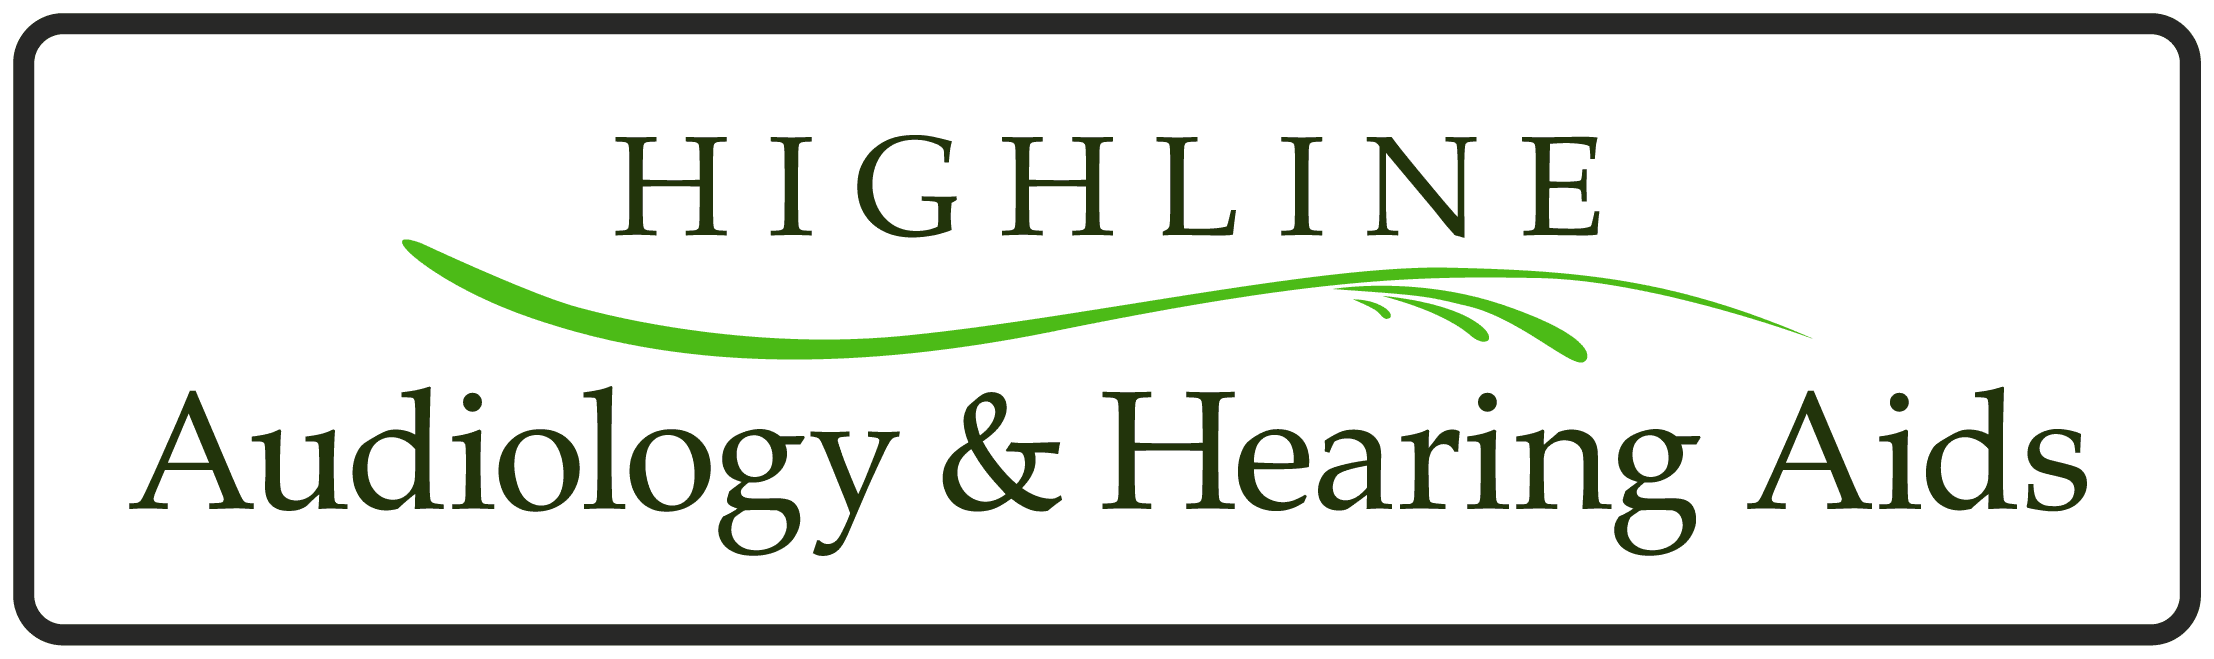 Highline-Audiology-and-hearing-aids-logo